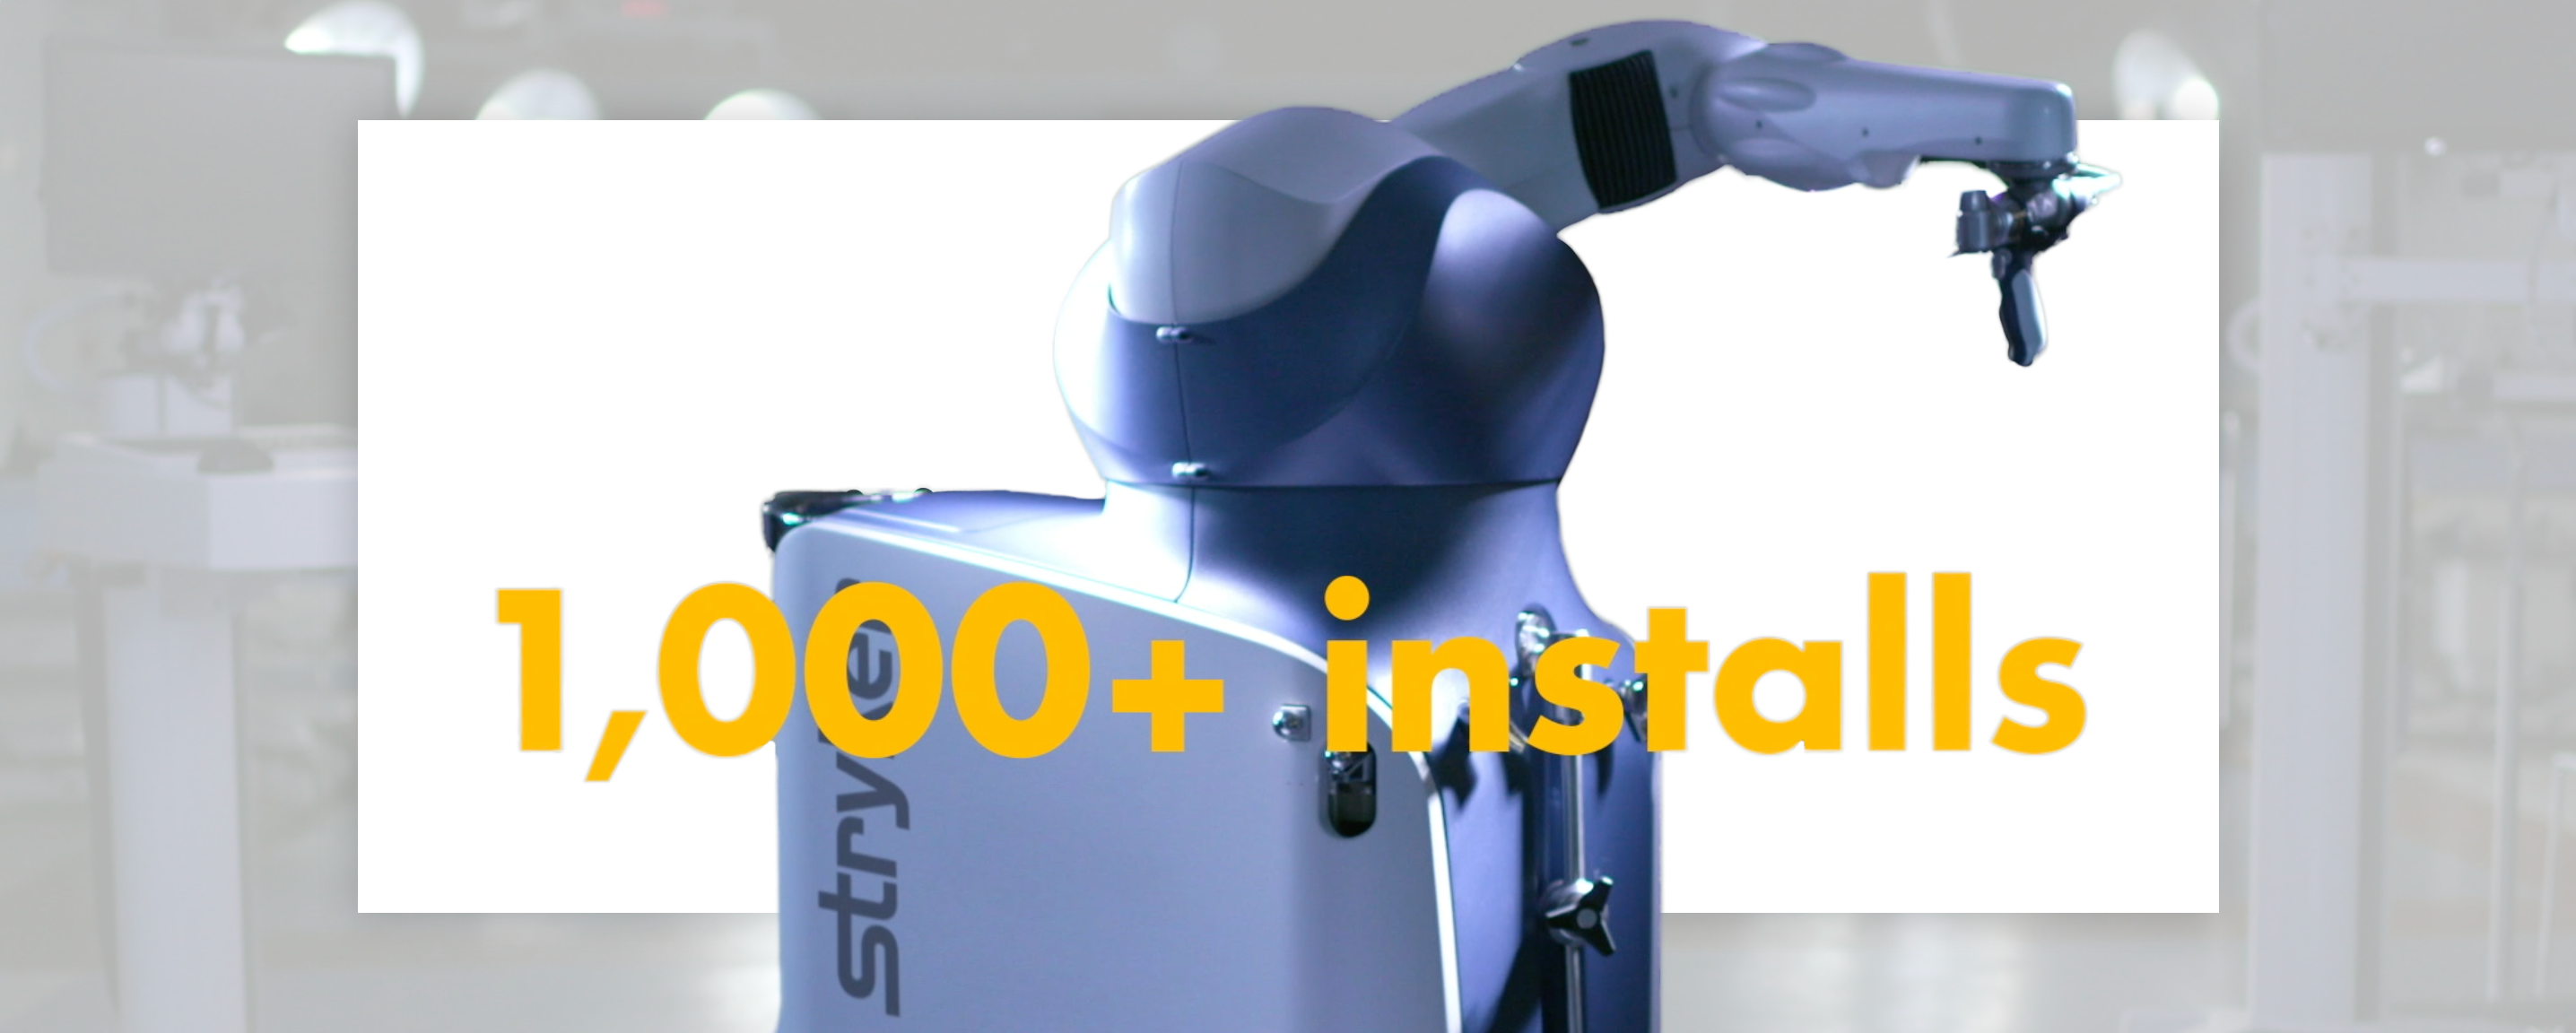 Stryker announces Mako System's 1,000th install